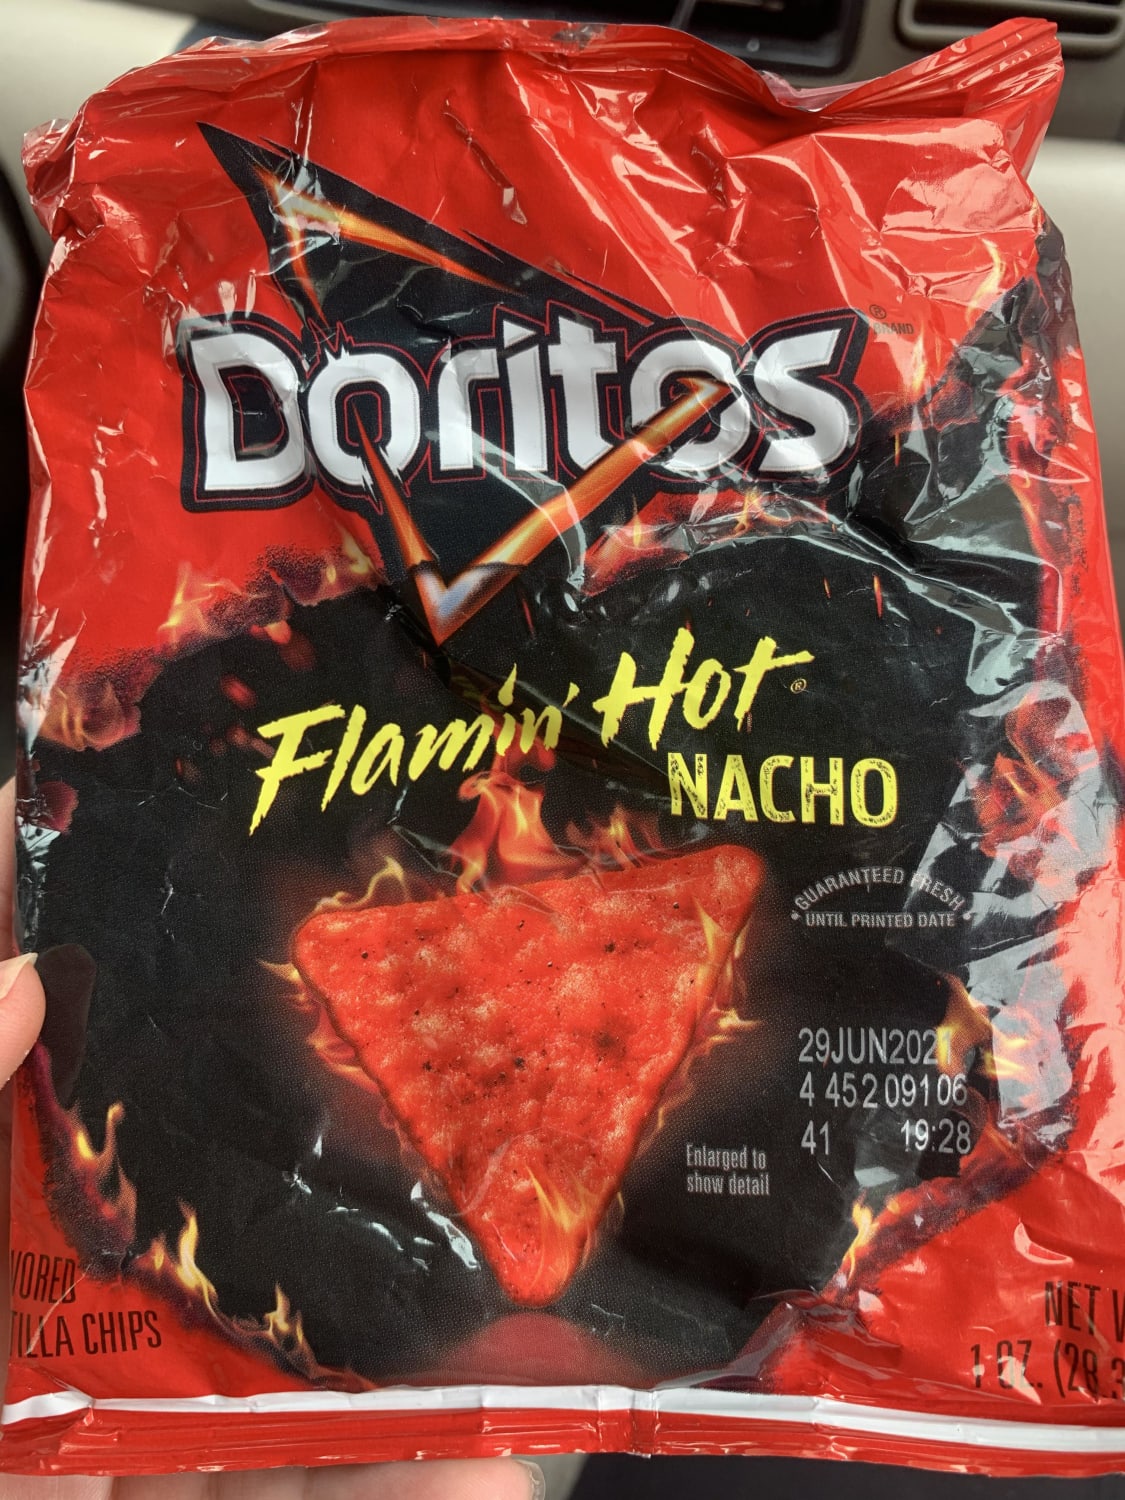 After complaining about acid reflux (brought on by too much spicy food) and pushing myself to work out, I had these + Tajin before I even got home from workout. Thought some of you may be able to relate